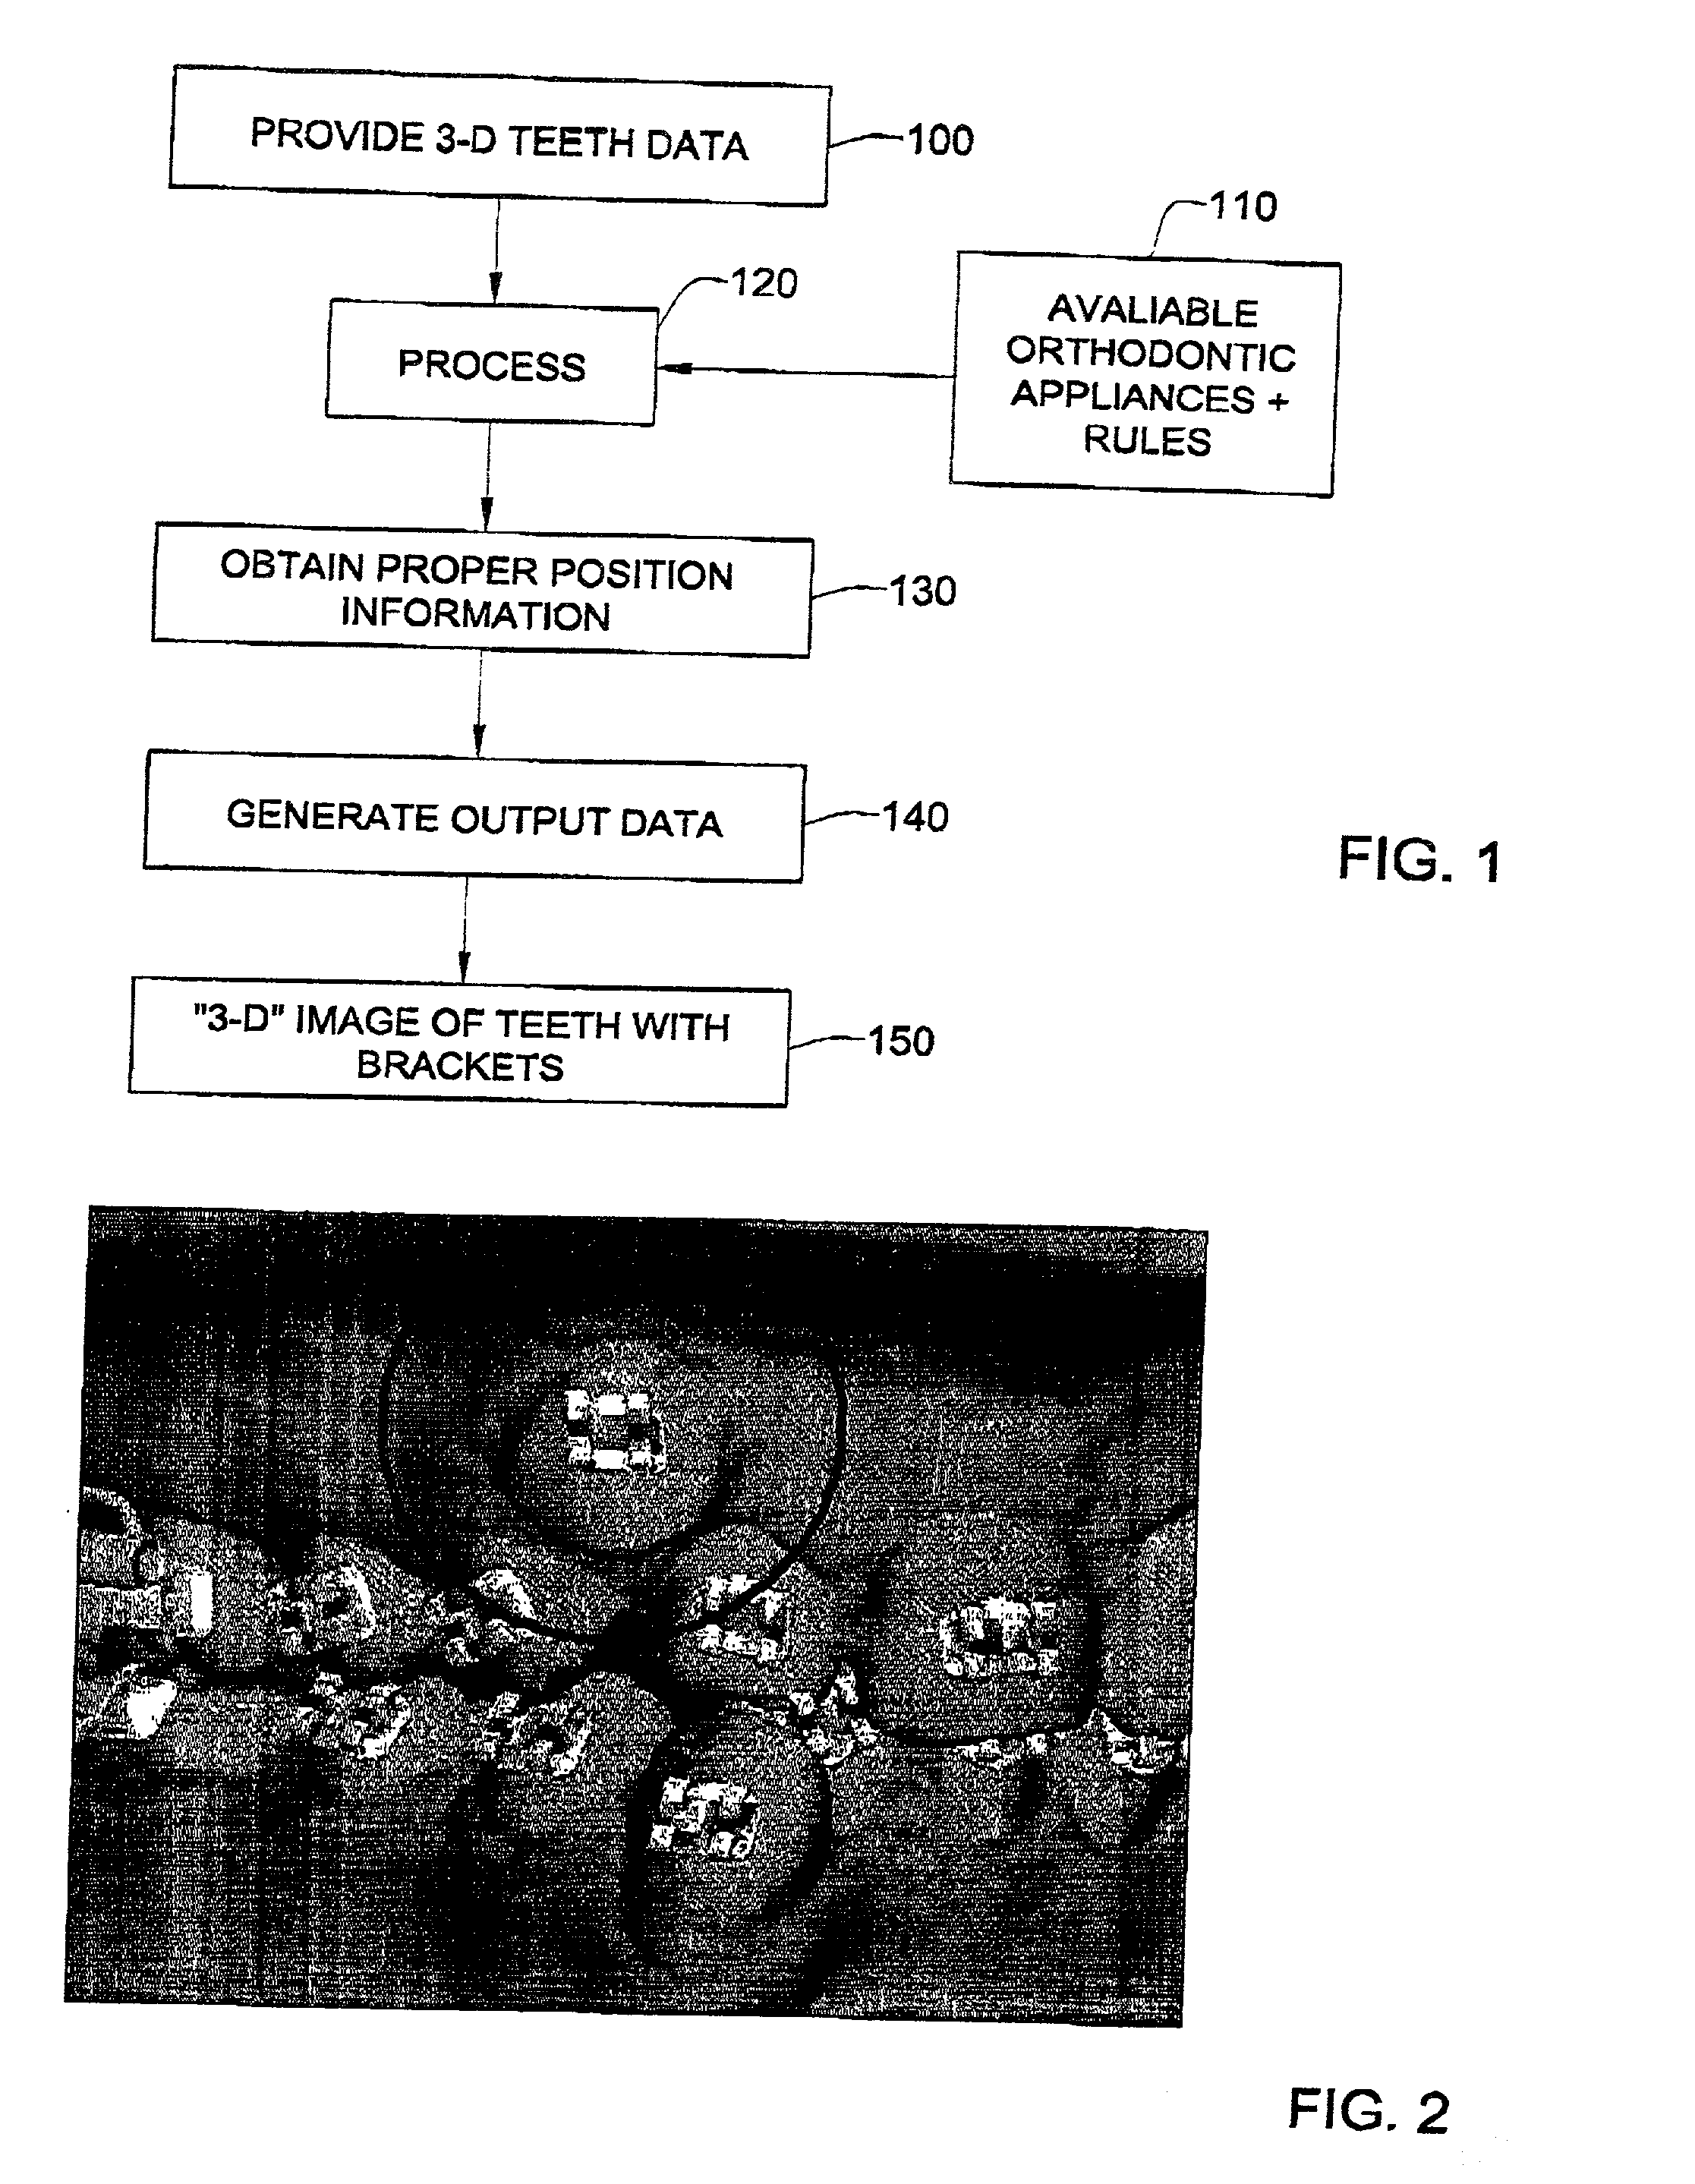 Method and system for assisting in applying an orthodontic treatment